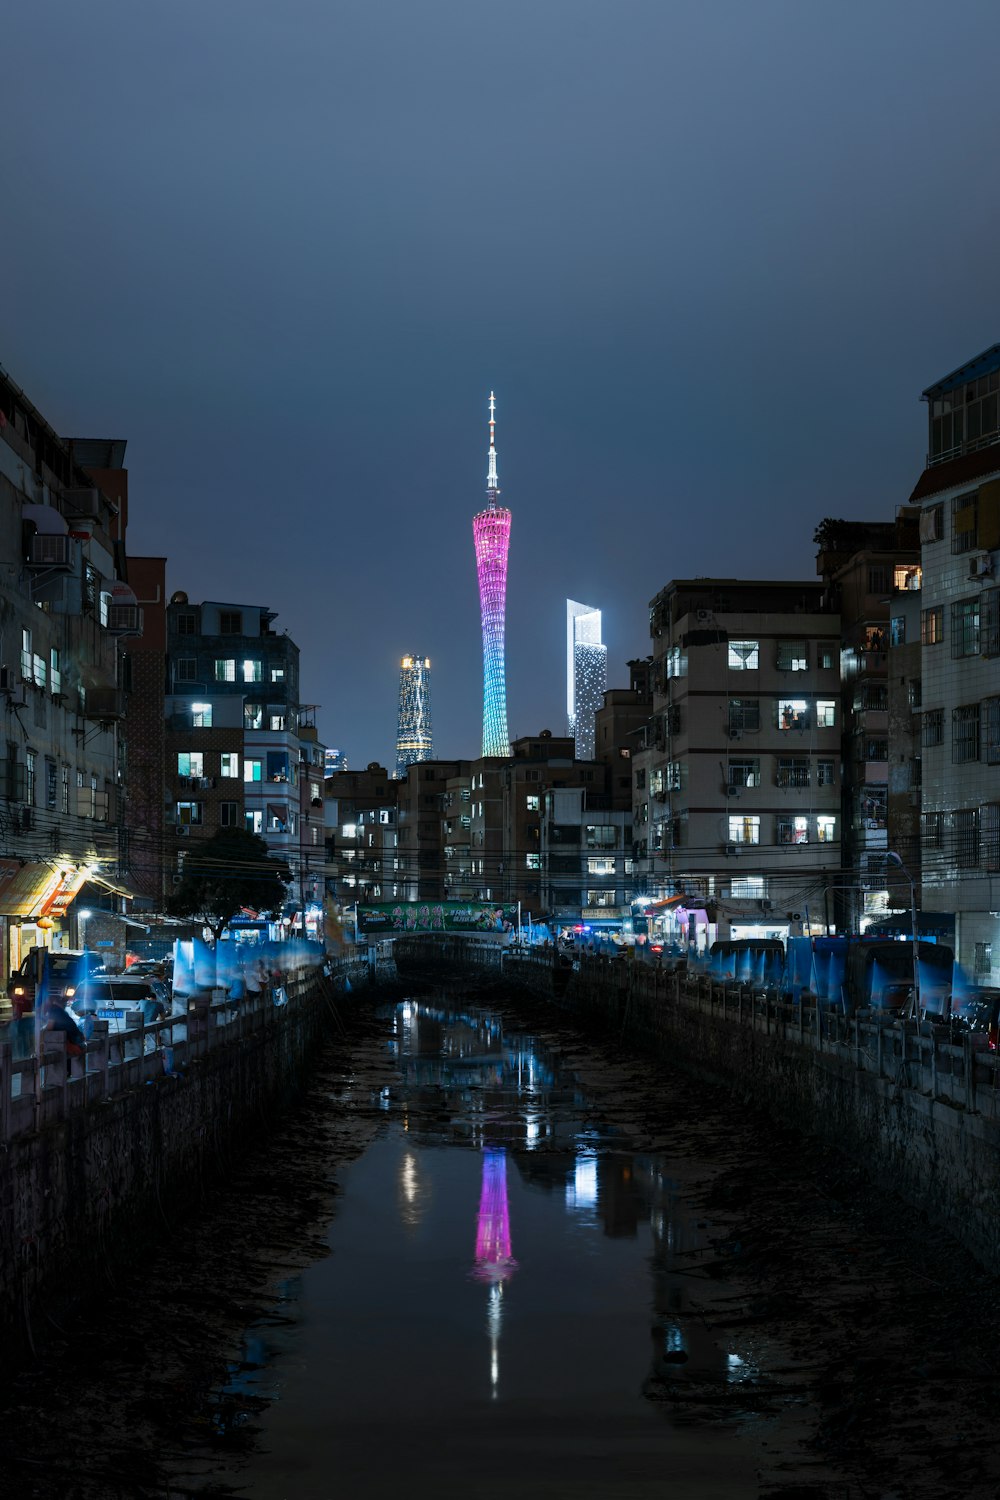 blue and pink lighted tower in the city